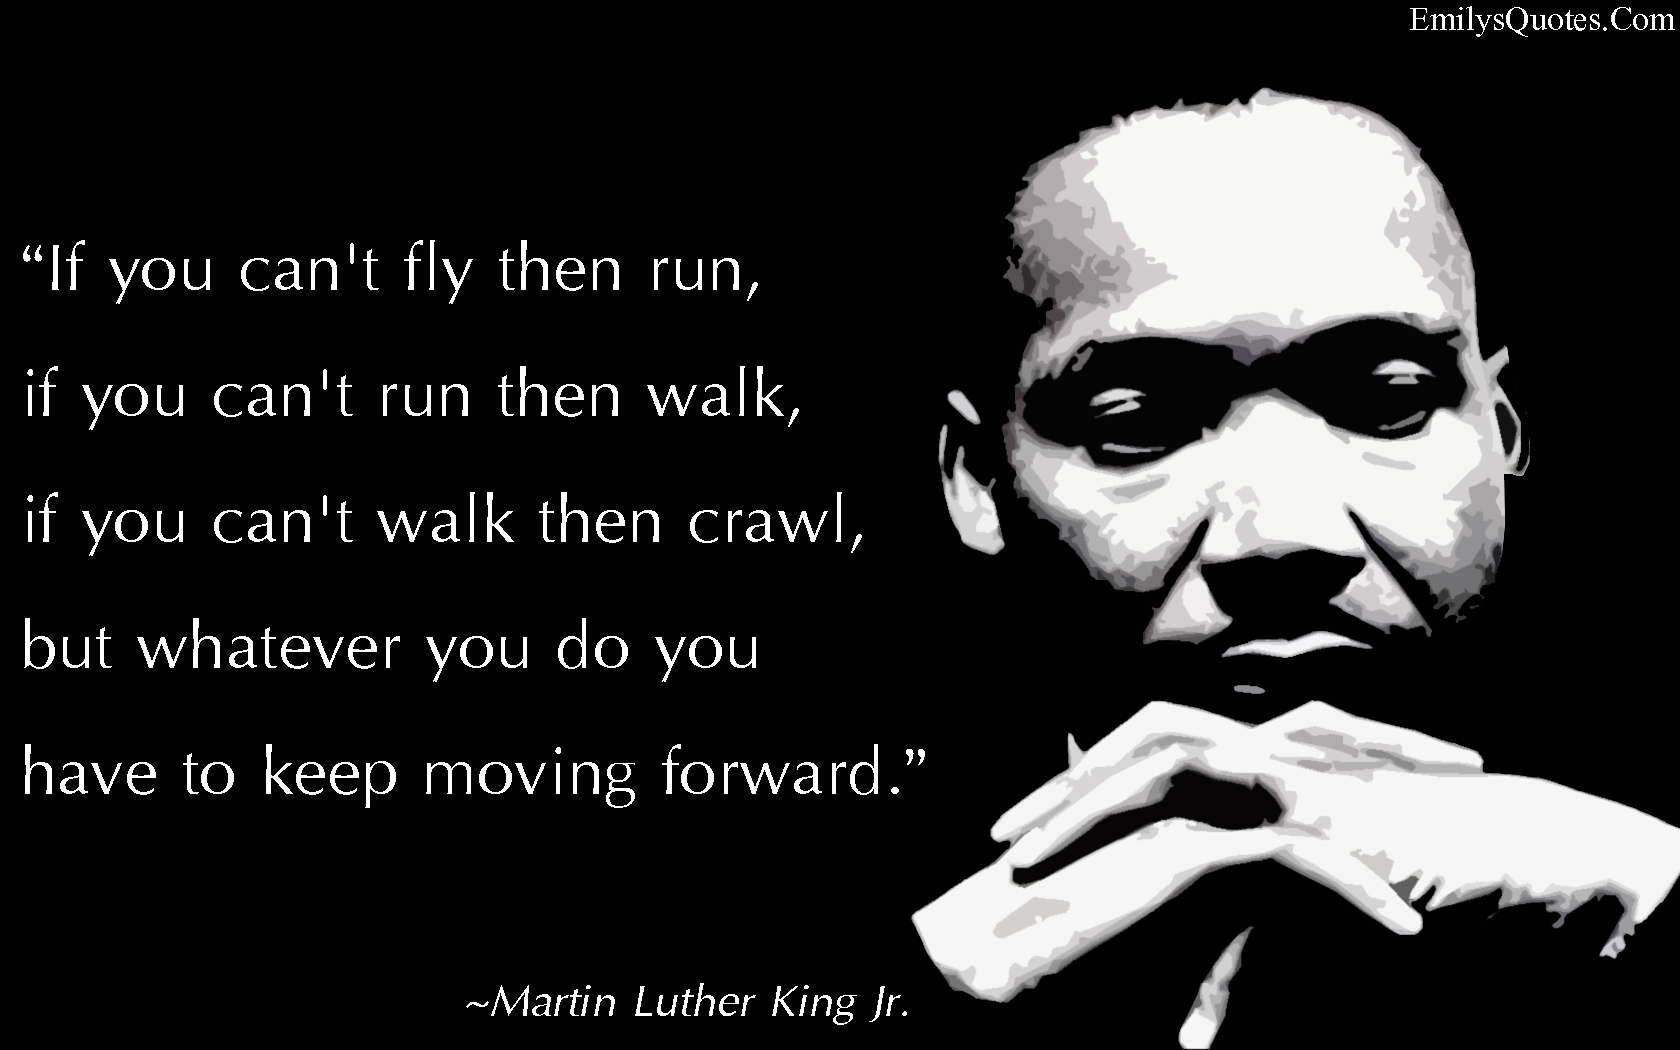 If you can’t fly then run, if you can’t run then walk, if you can’t walk then crawl, but whatever you do you have to keep moving forward